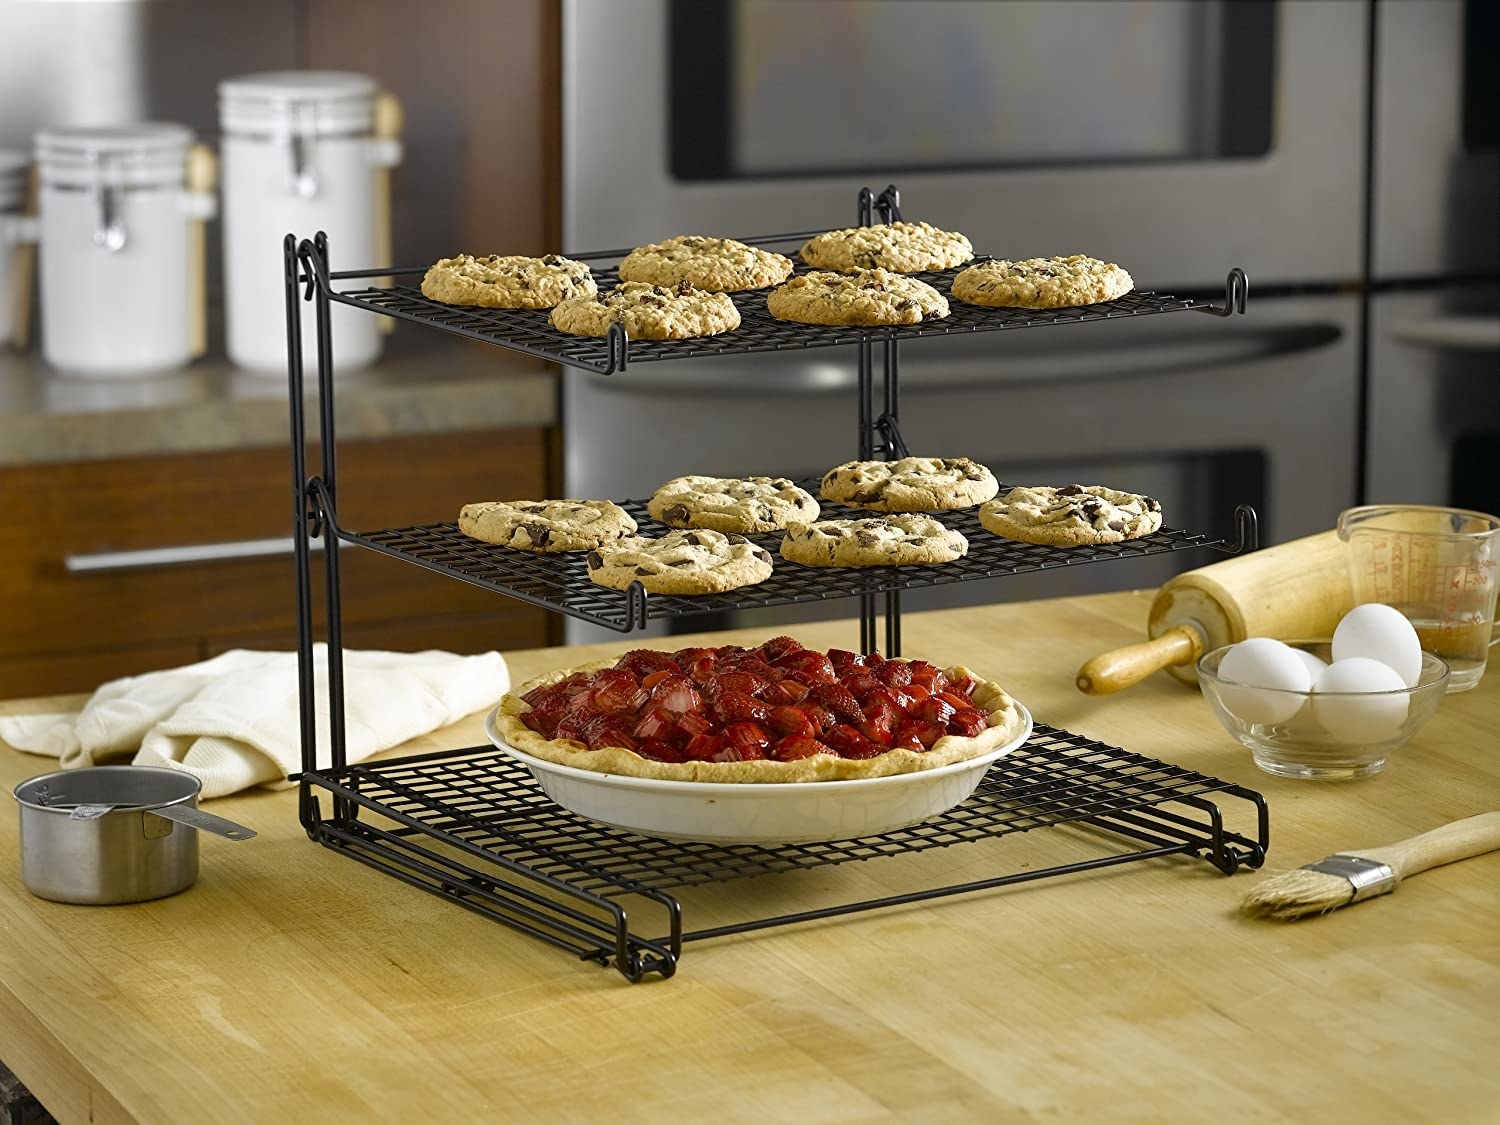 the black three tiered wire rack